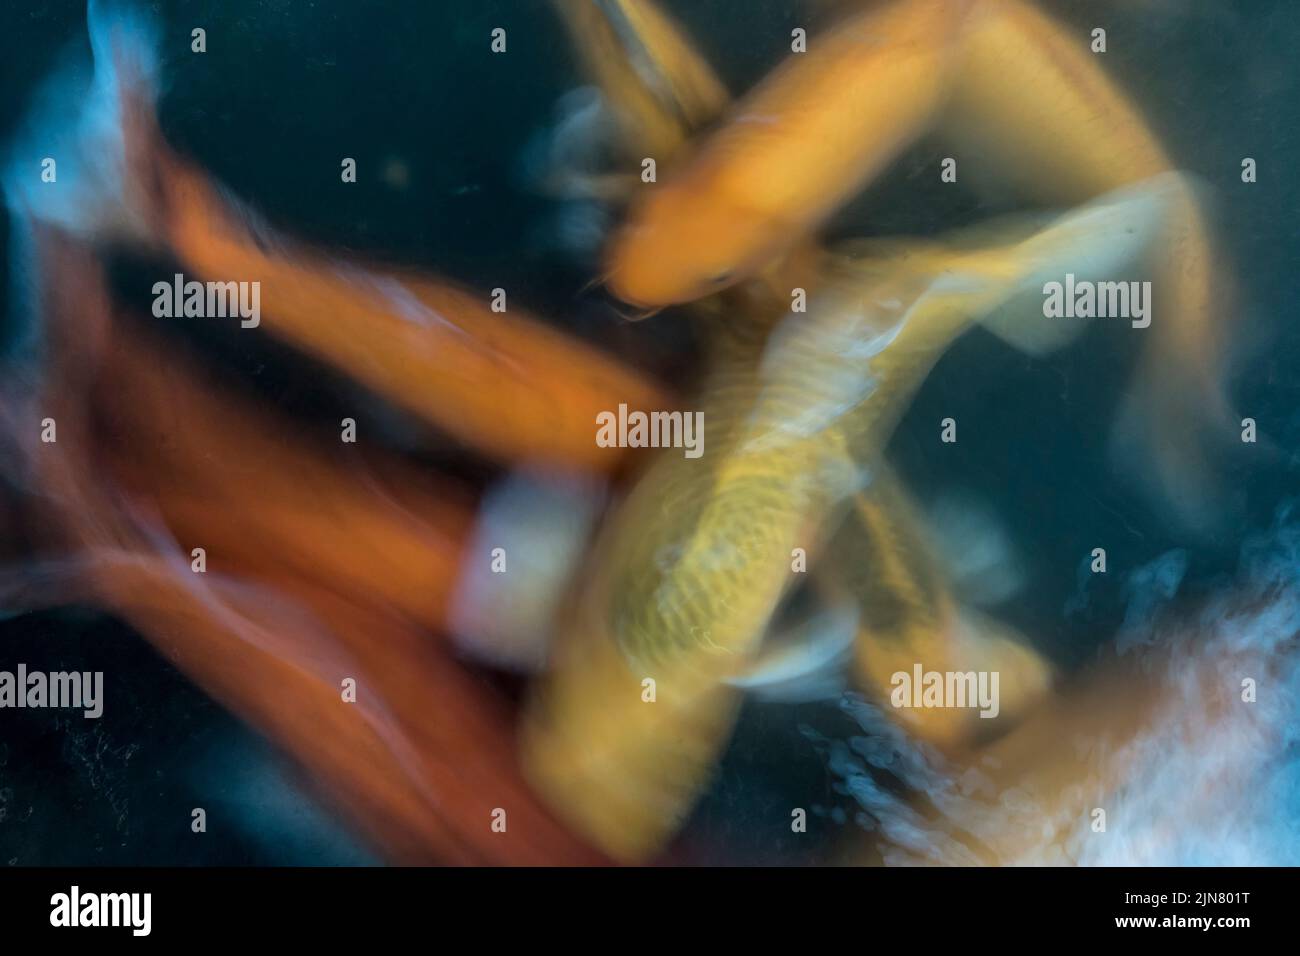 Goldfish in motion in water blurred Stock Photo